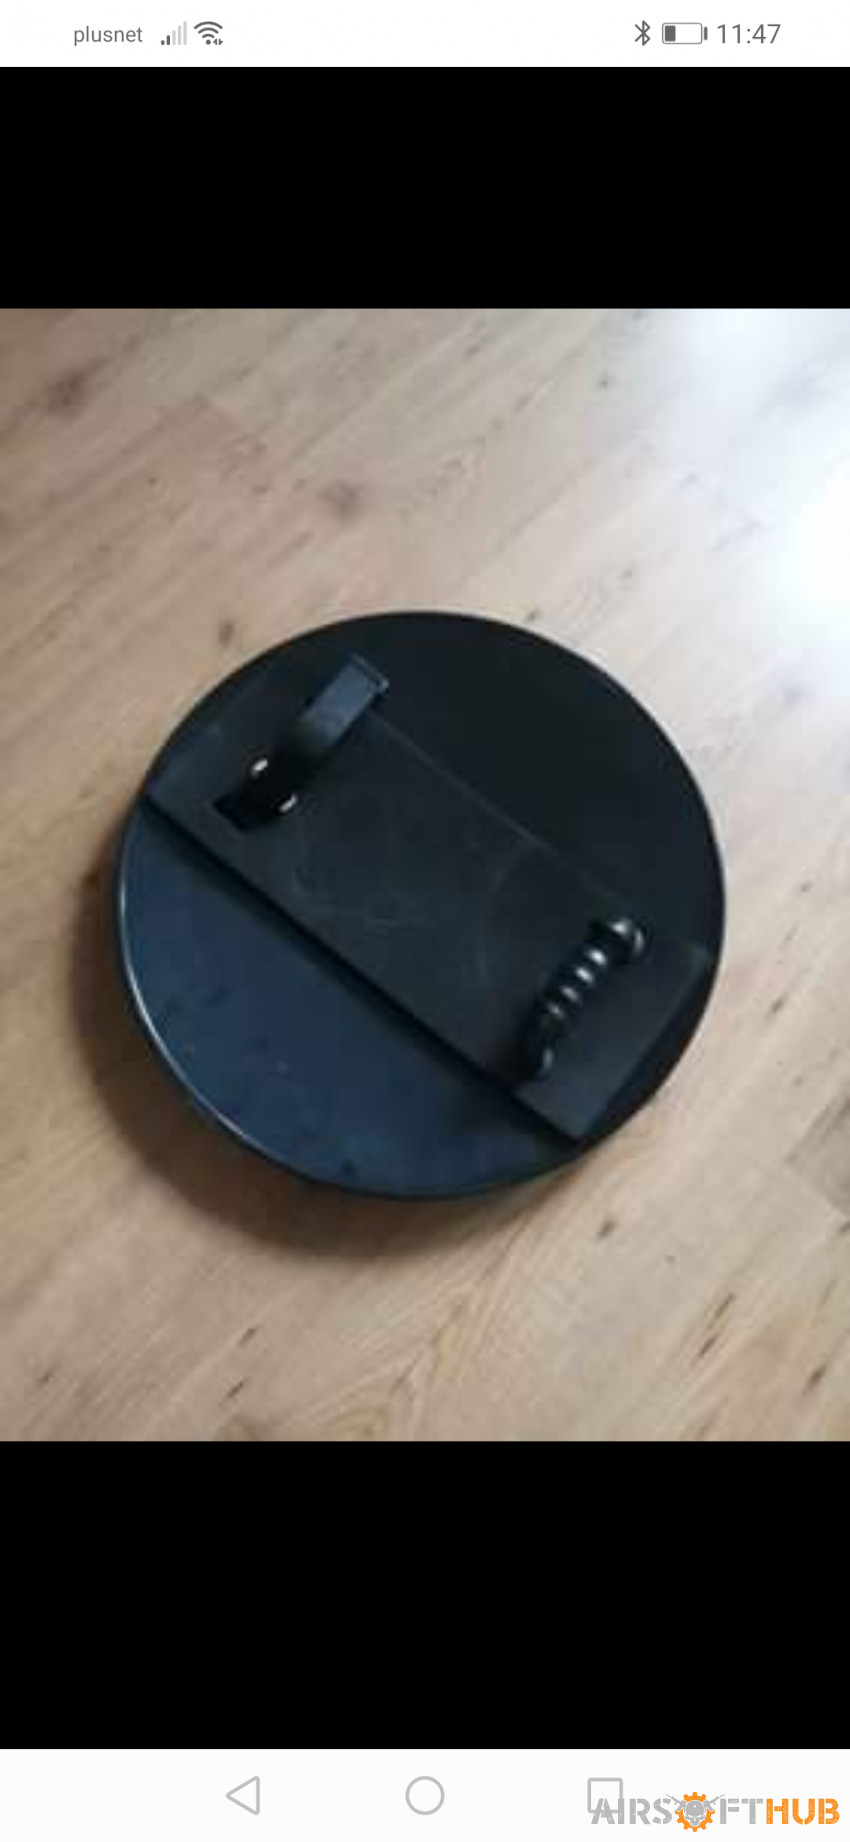 Airsoft shield - Used airsoft equipment